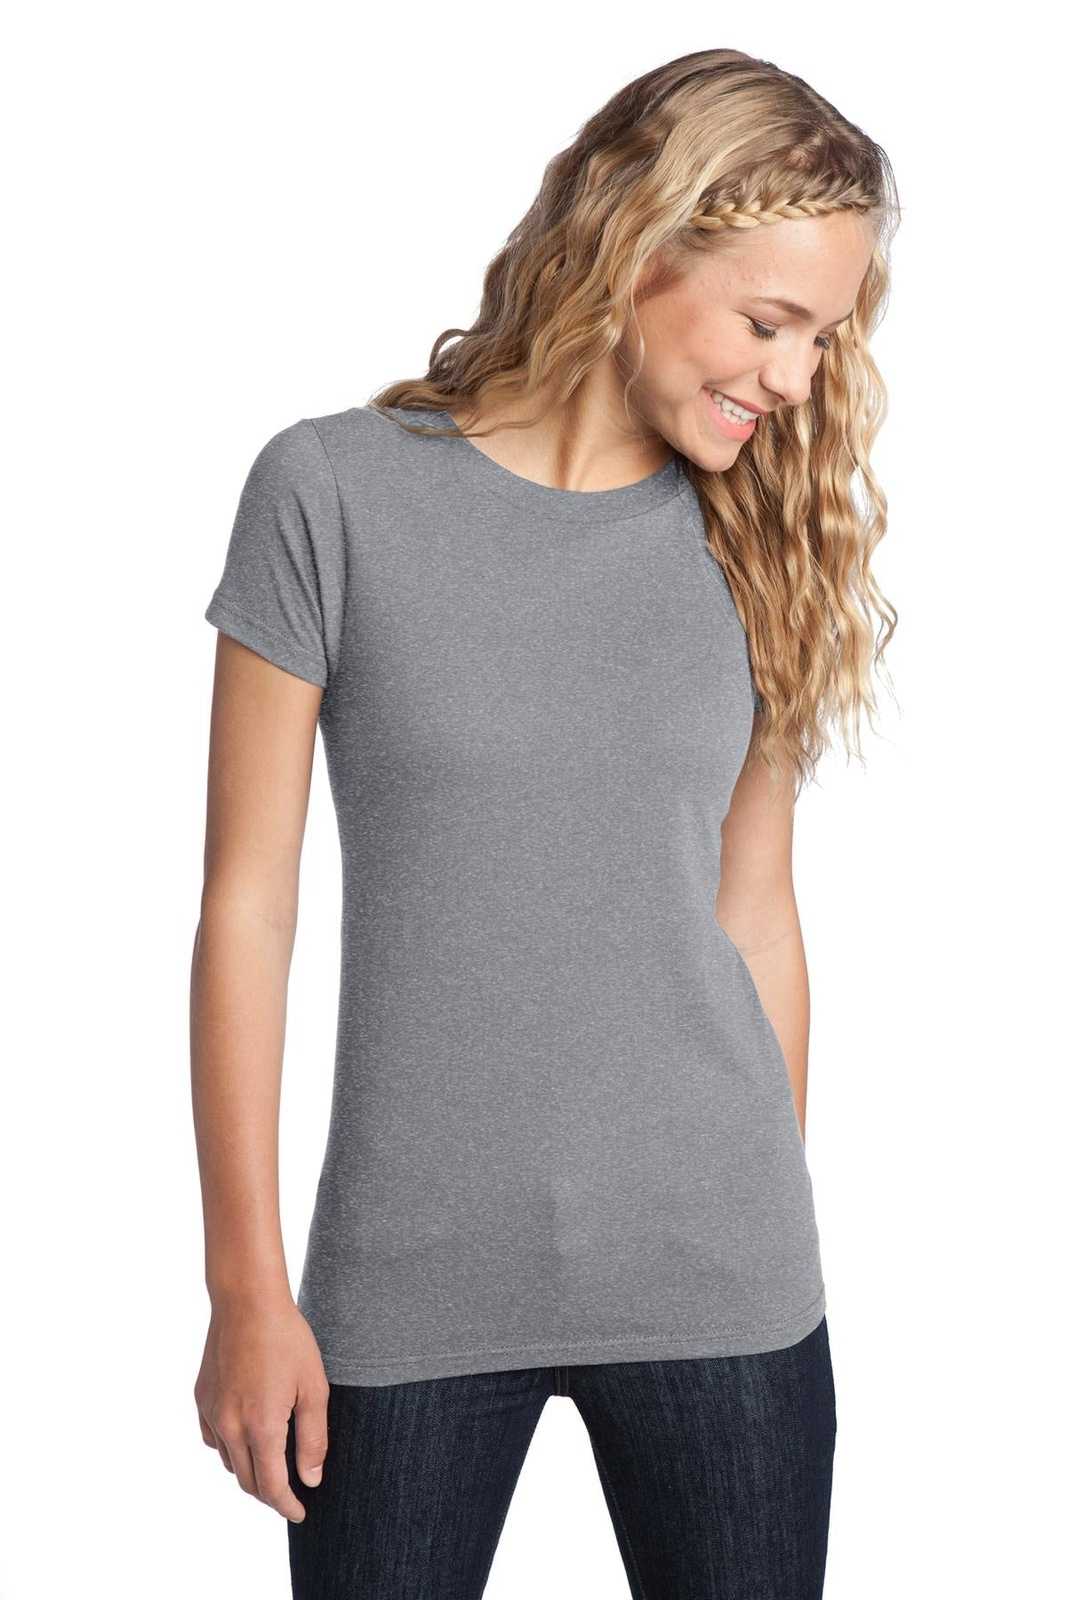 District DT5001 Women's Fitted The Concert Tee - Heather Gray - HIT a Double - 1